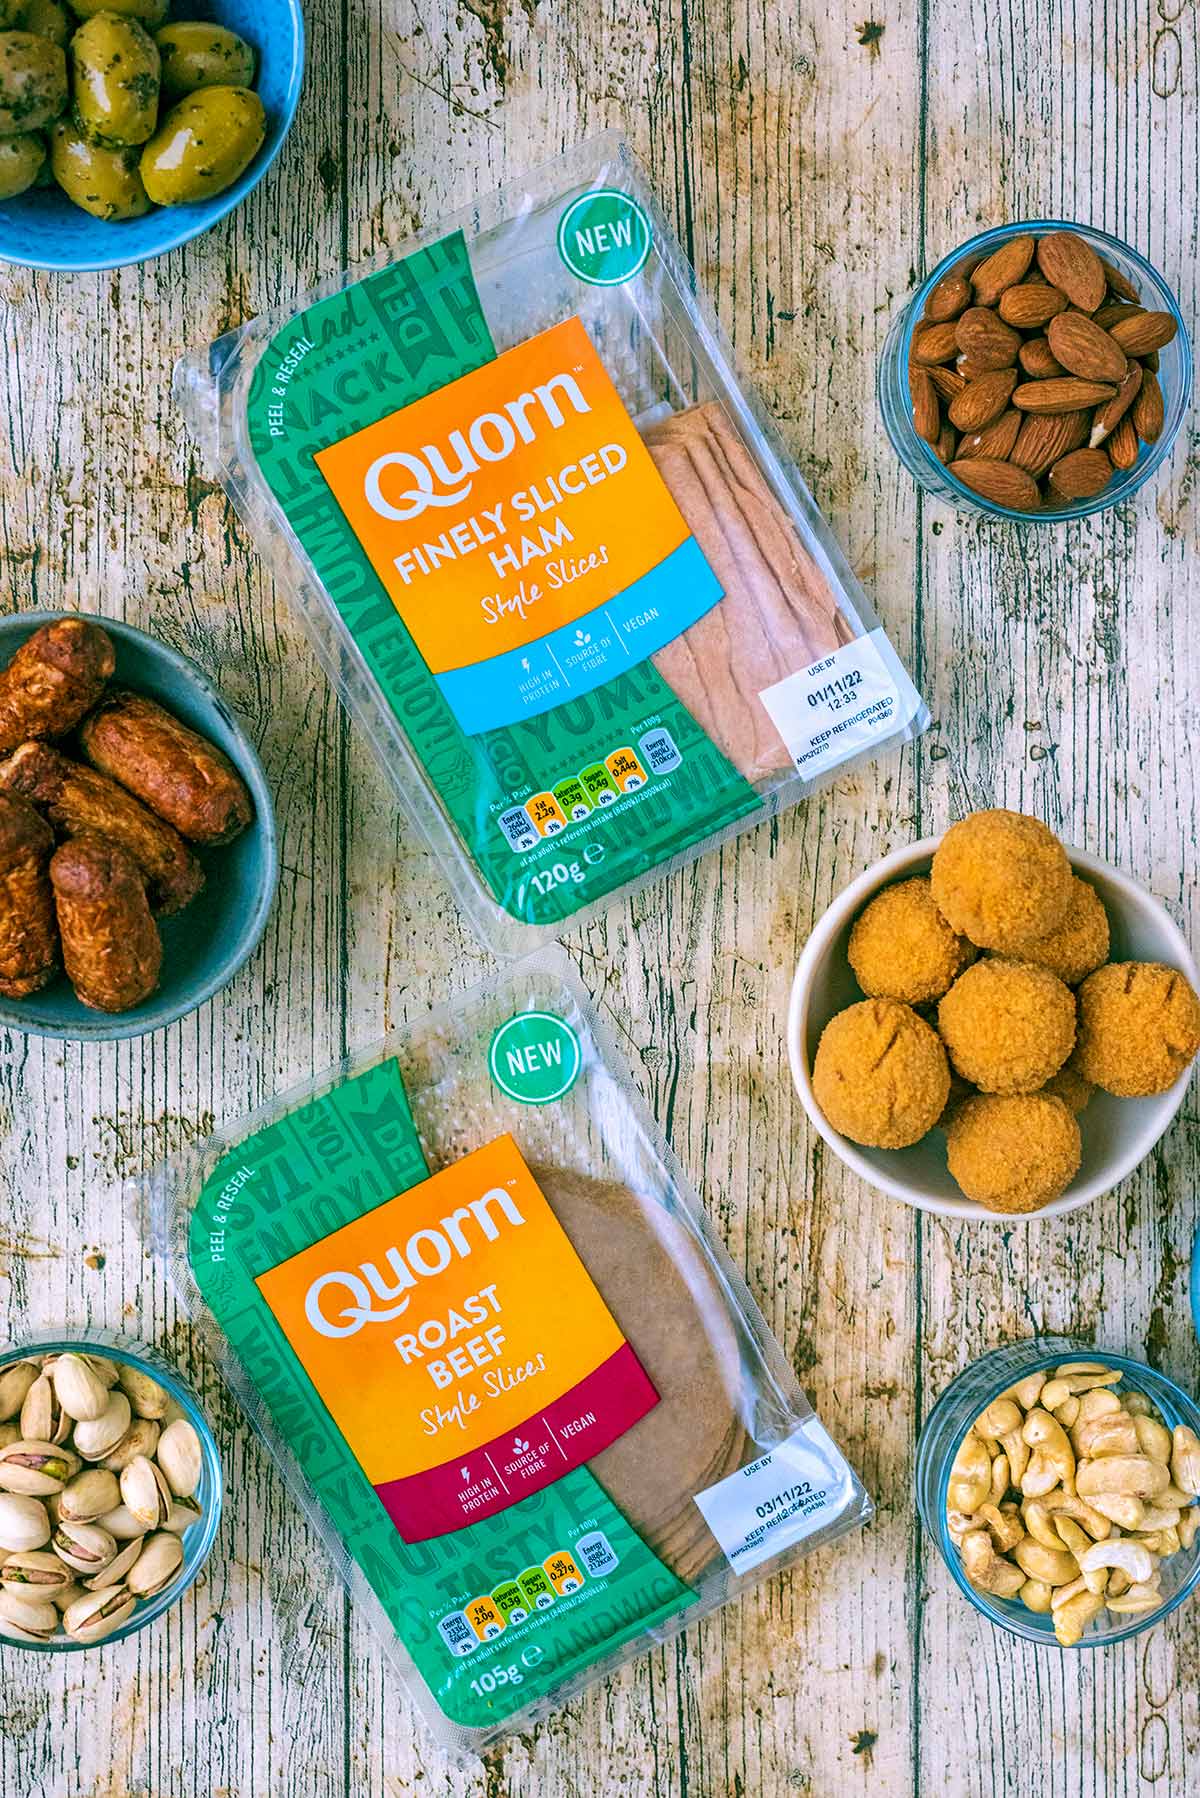 Two packs of Quorn deli slices on a wooden surface.